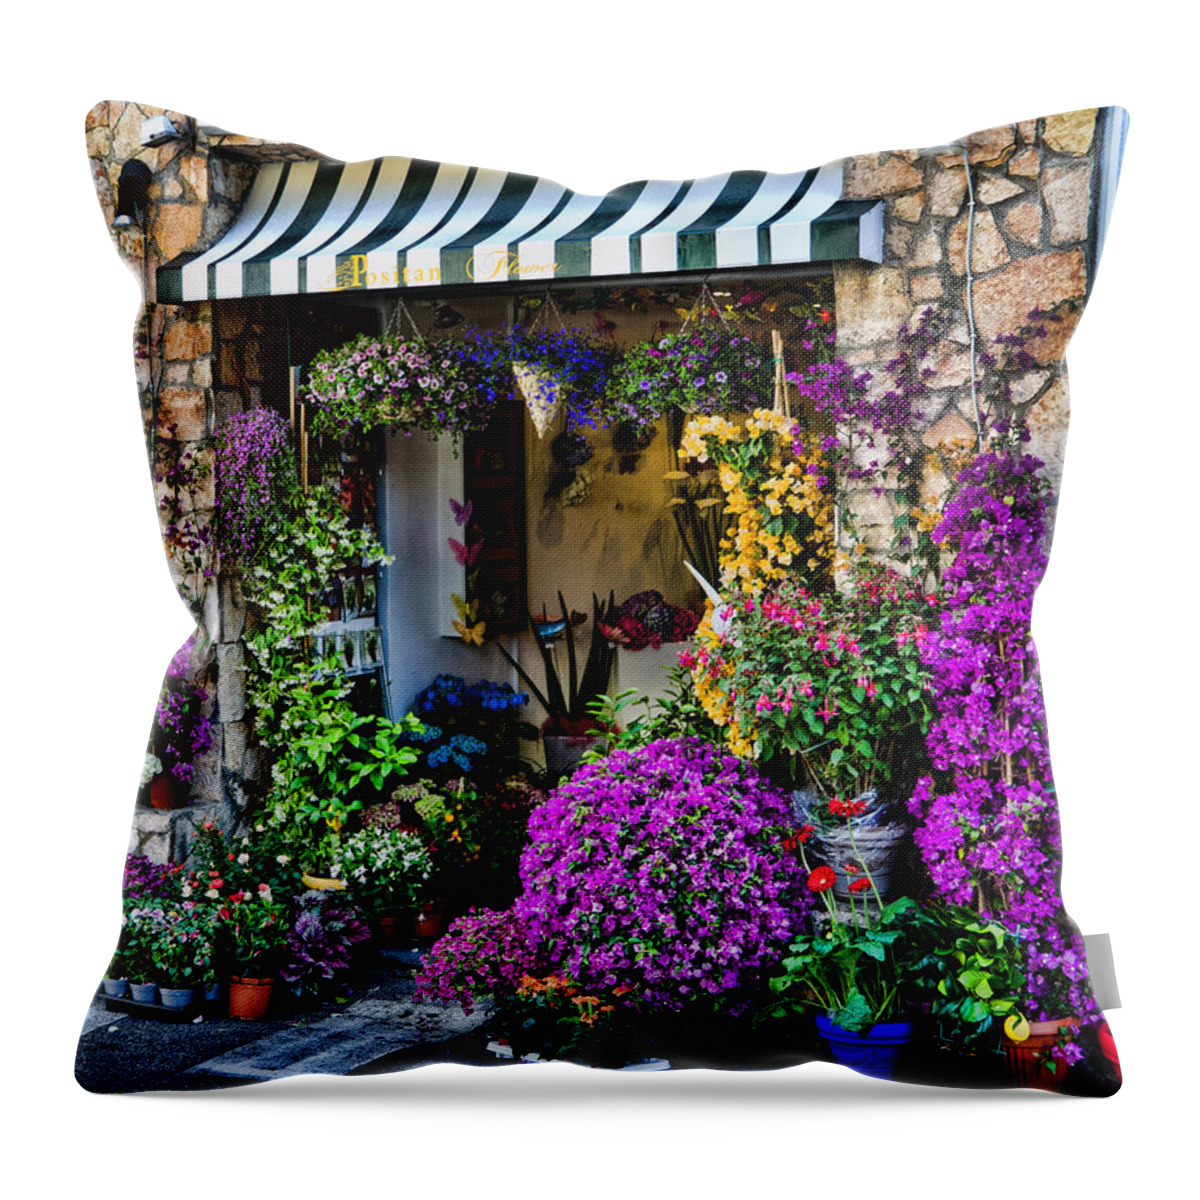 Positano Italy Throw Pillow featuring the photograph Positano Flower Shop by Jon Berghoff